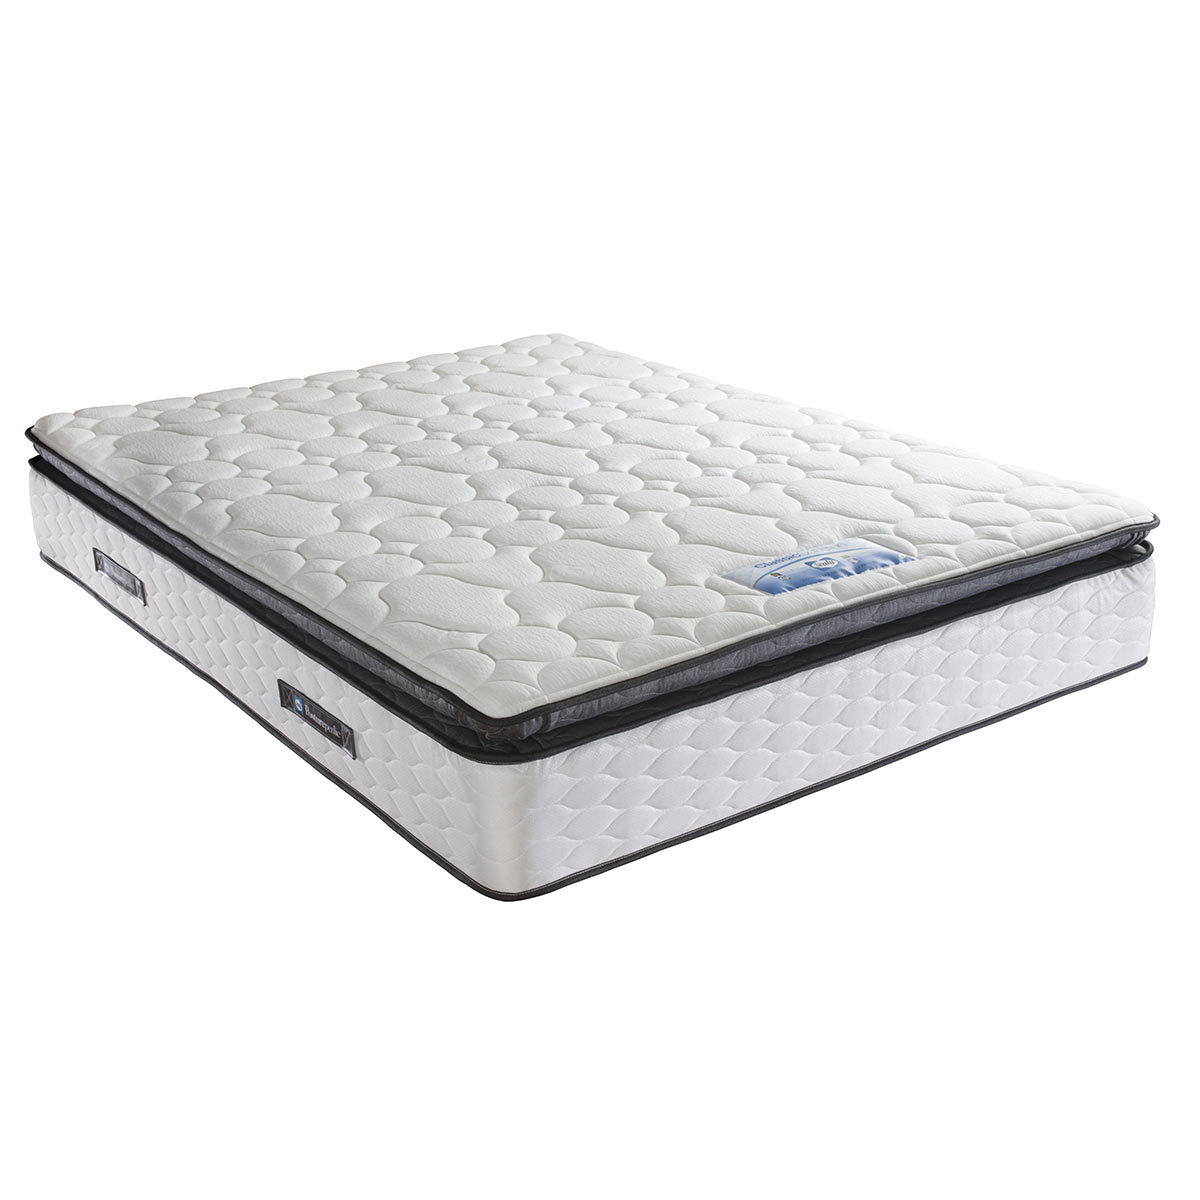 Sealy Symphony Posturetech Memory Mattress & Divan in Fawn in 4 Sizes